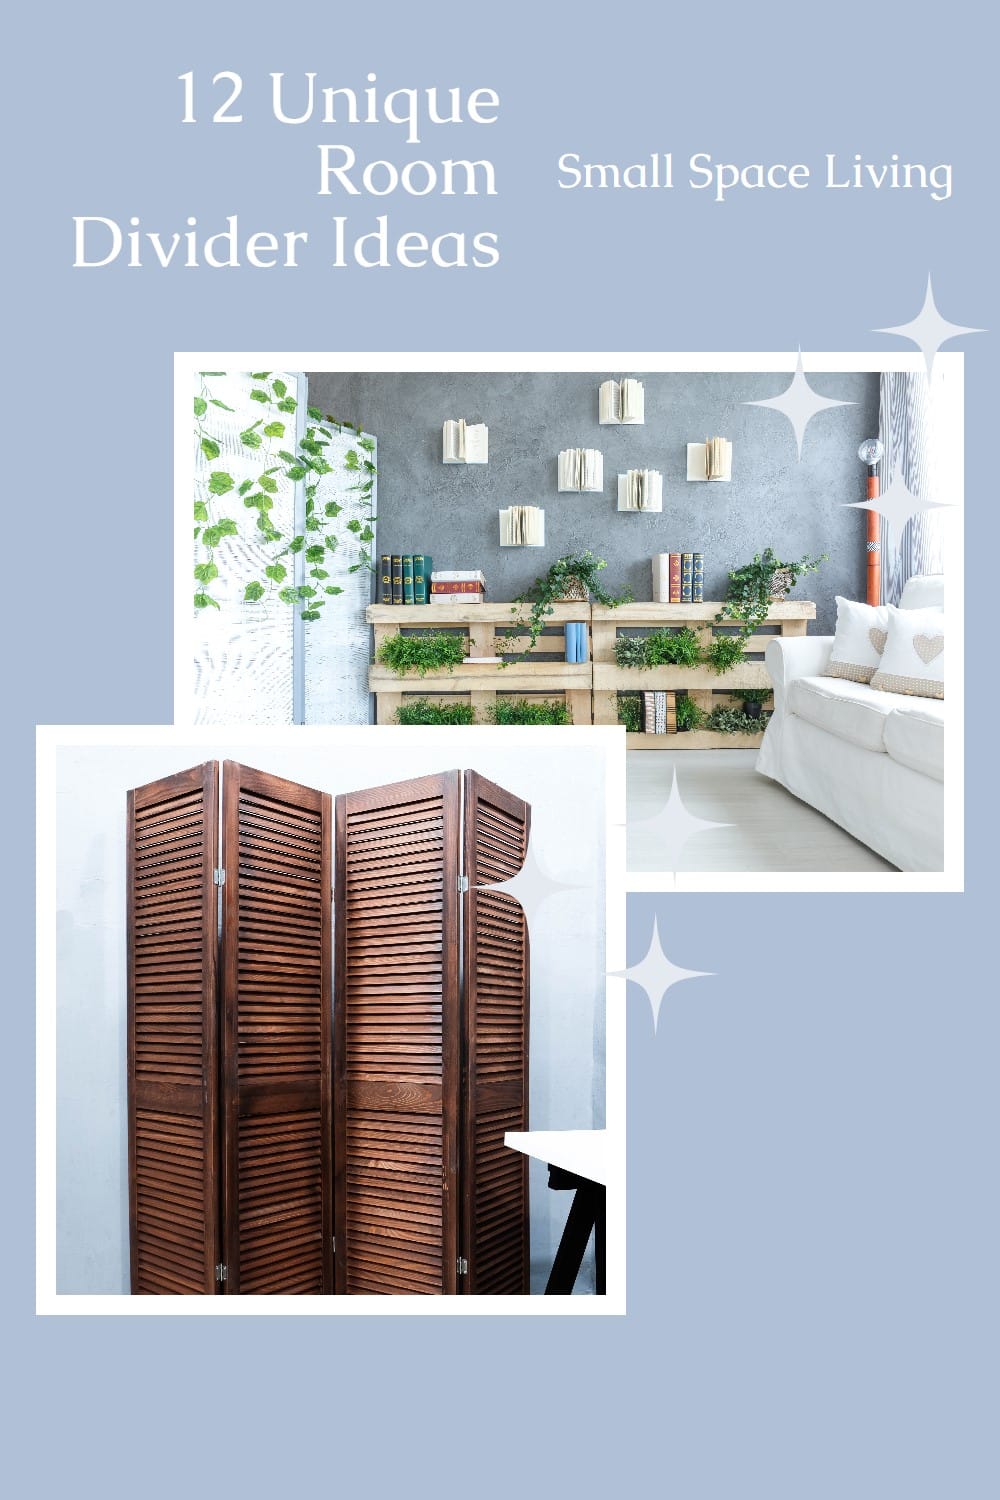 If you're having small space privacy issues, or trying to break up an open floor plan, these 12 room divider options will solve your problem. via @repurposedlife